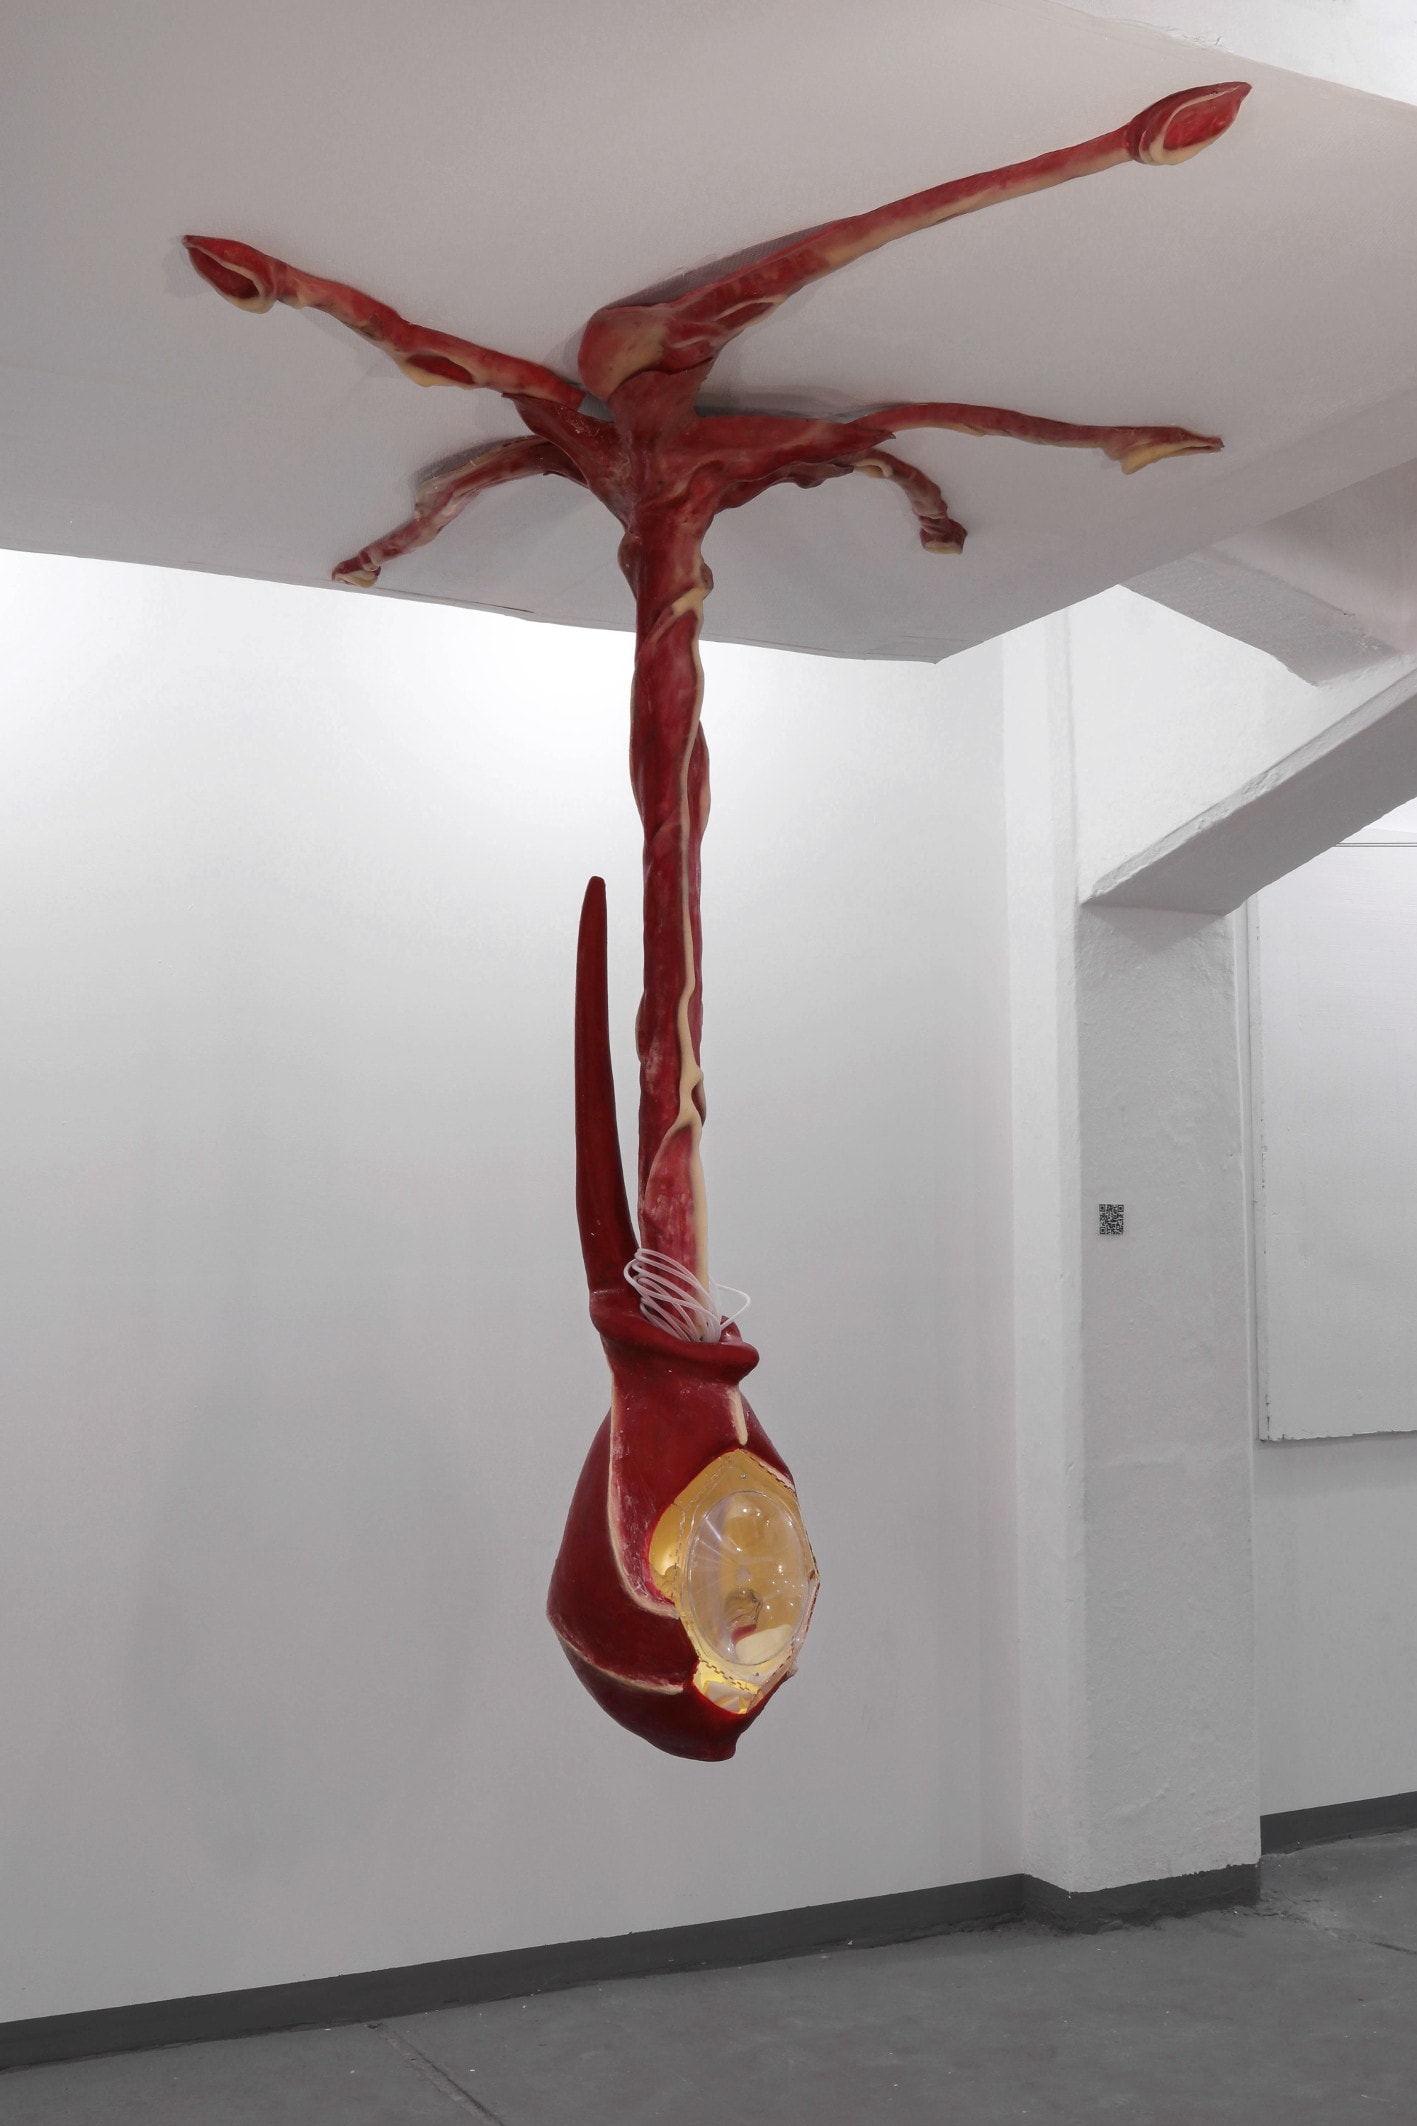 a ted and yellow sculpture handing from the ceiling, the lower part has a transparent container